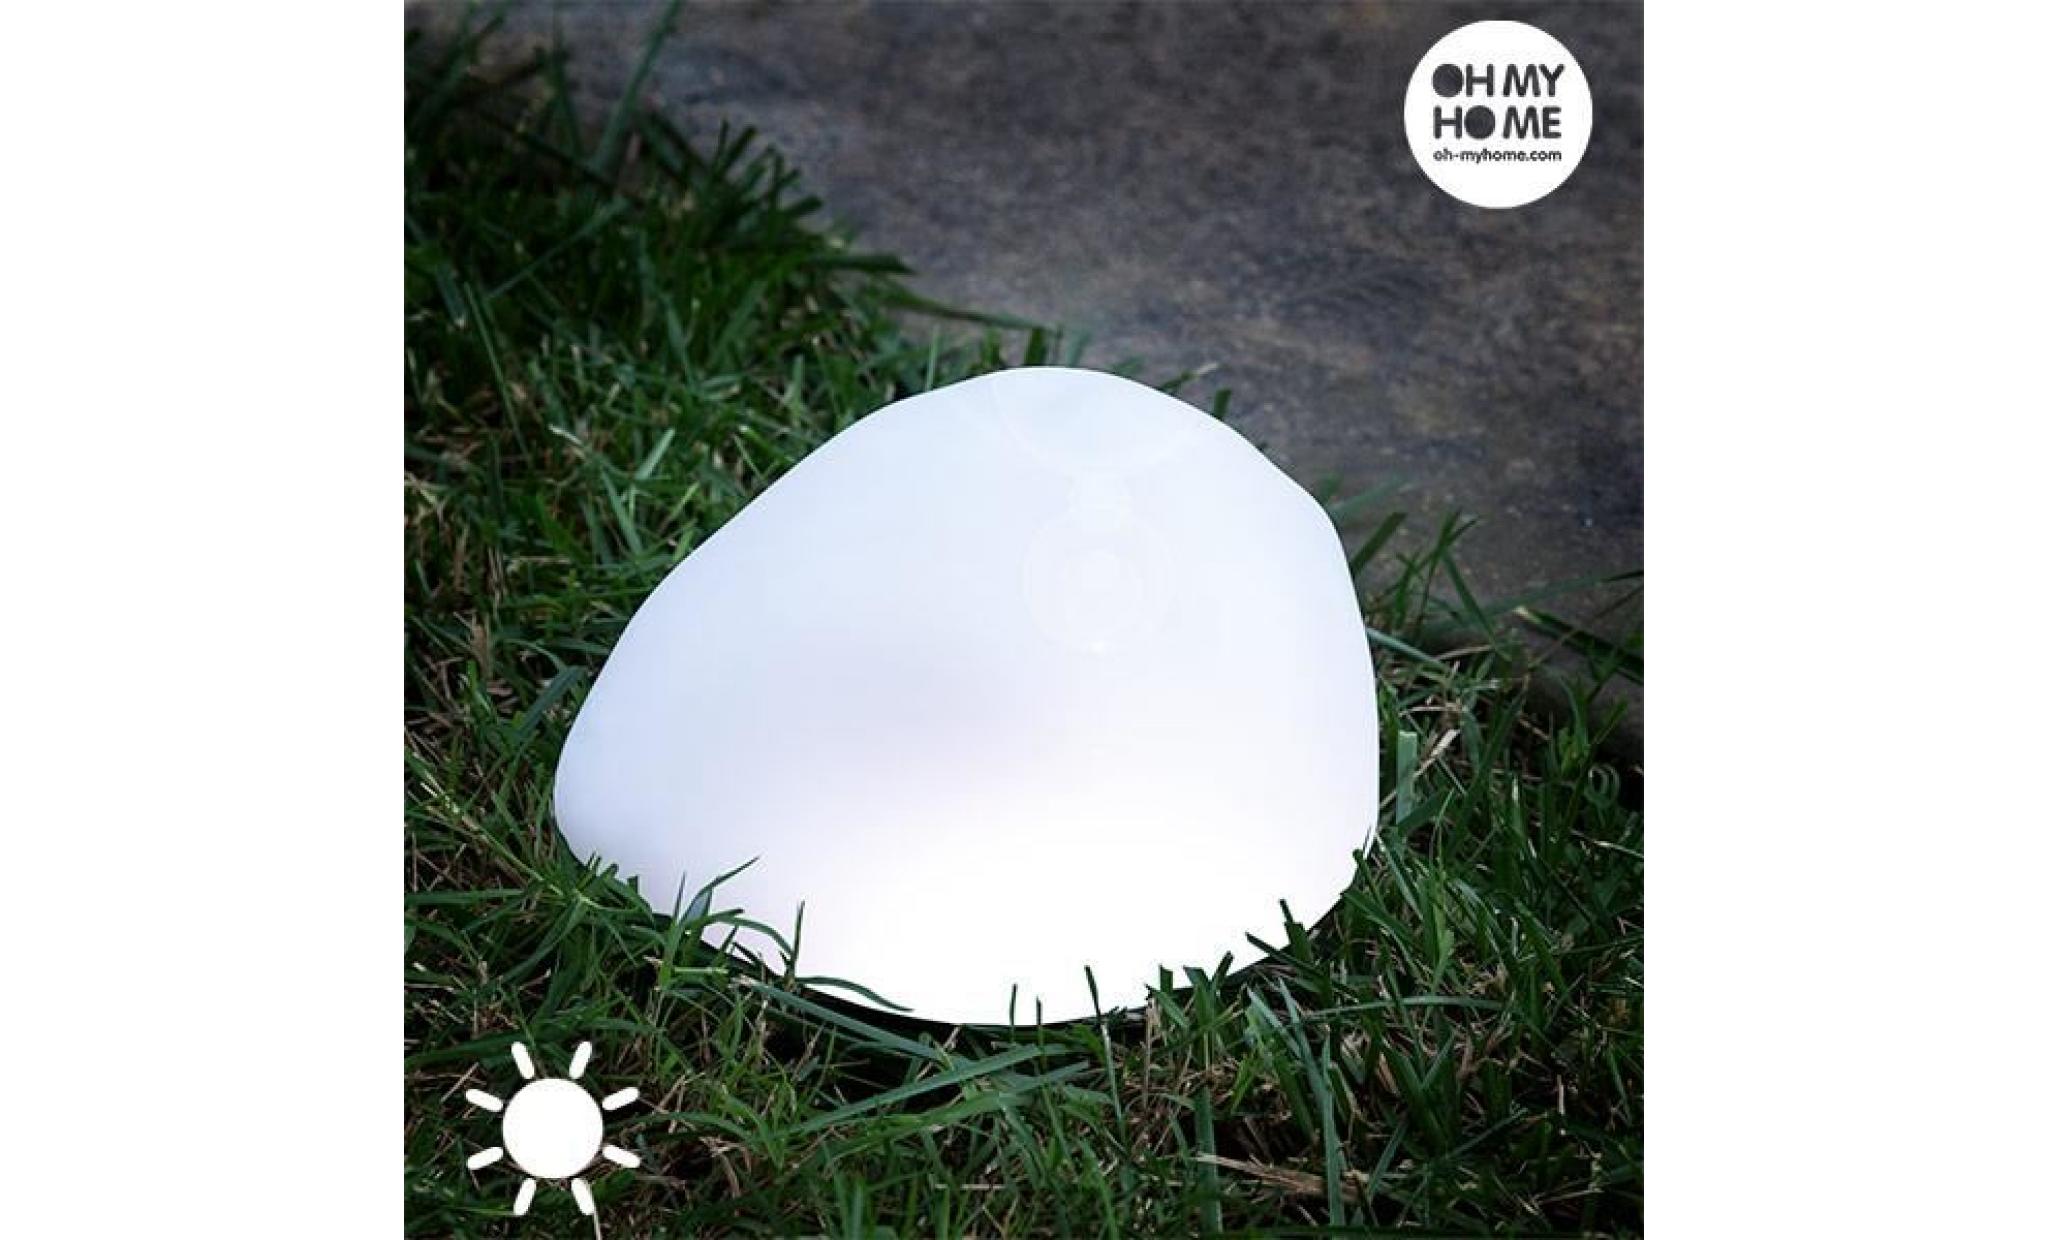 pierre solaire décorative oh my home (3 led)